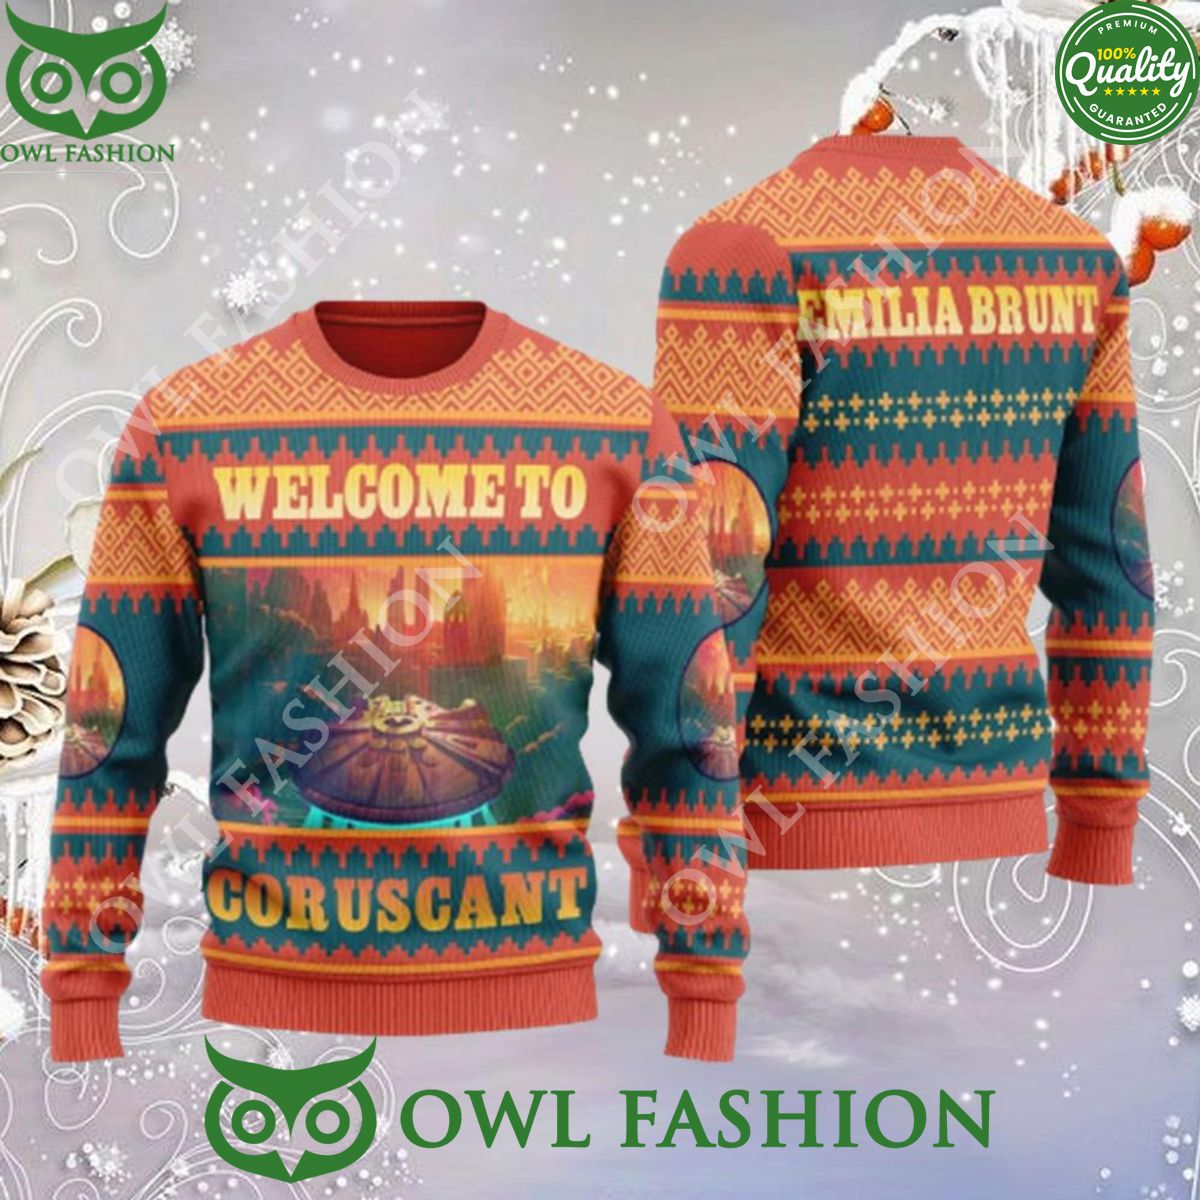 welcome to coruscant star wars ugly sweater jumper 1 ALCUC.jpg